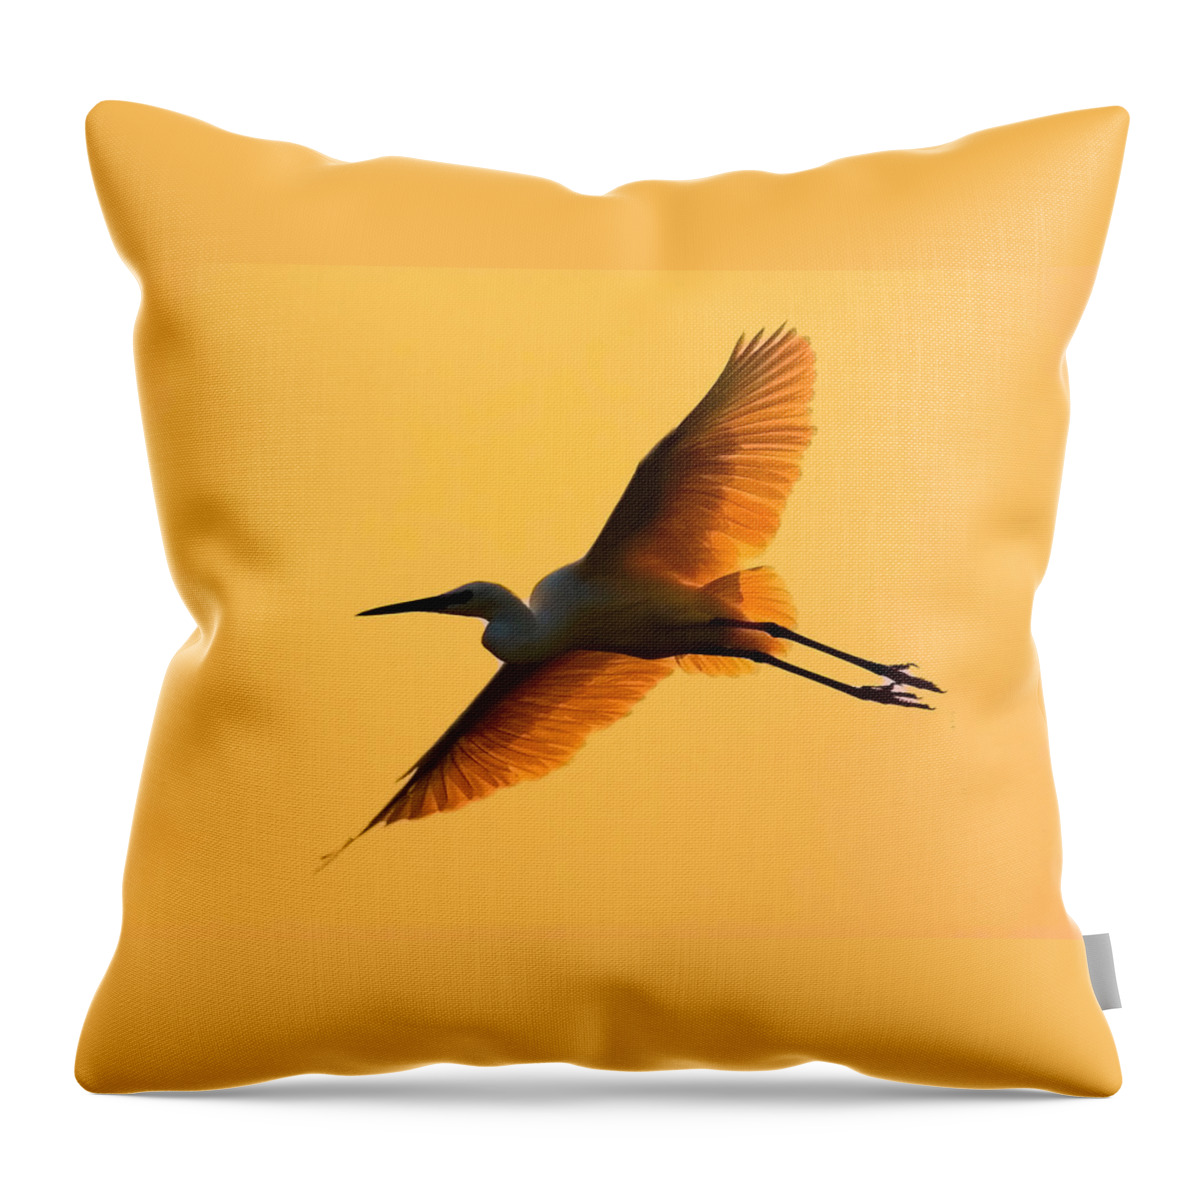 Bird Throw Pillow featuring the photograph In Flight by Amanda Stadther